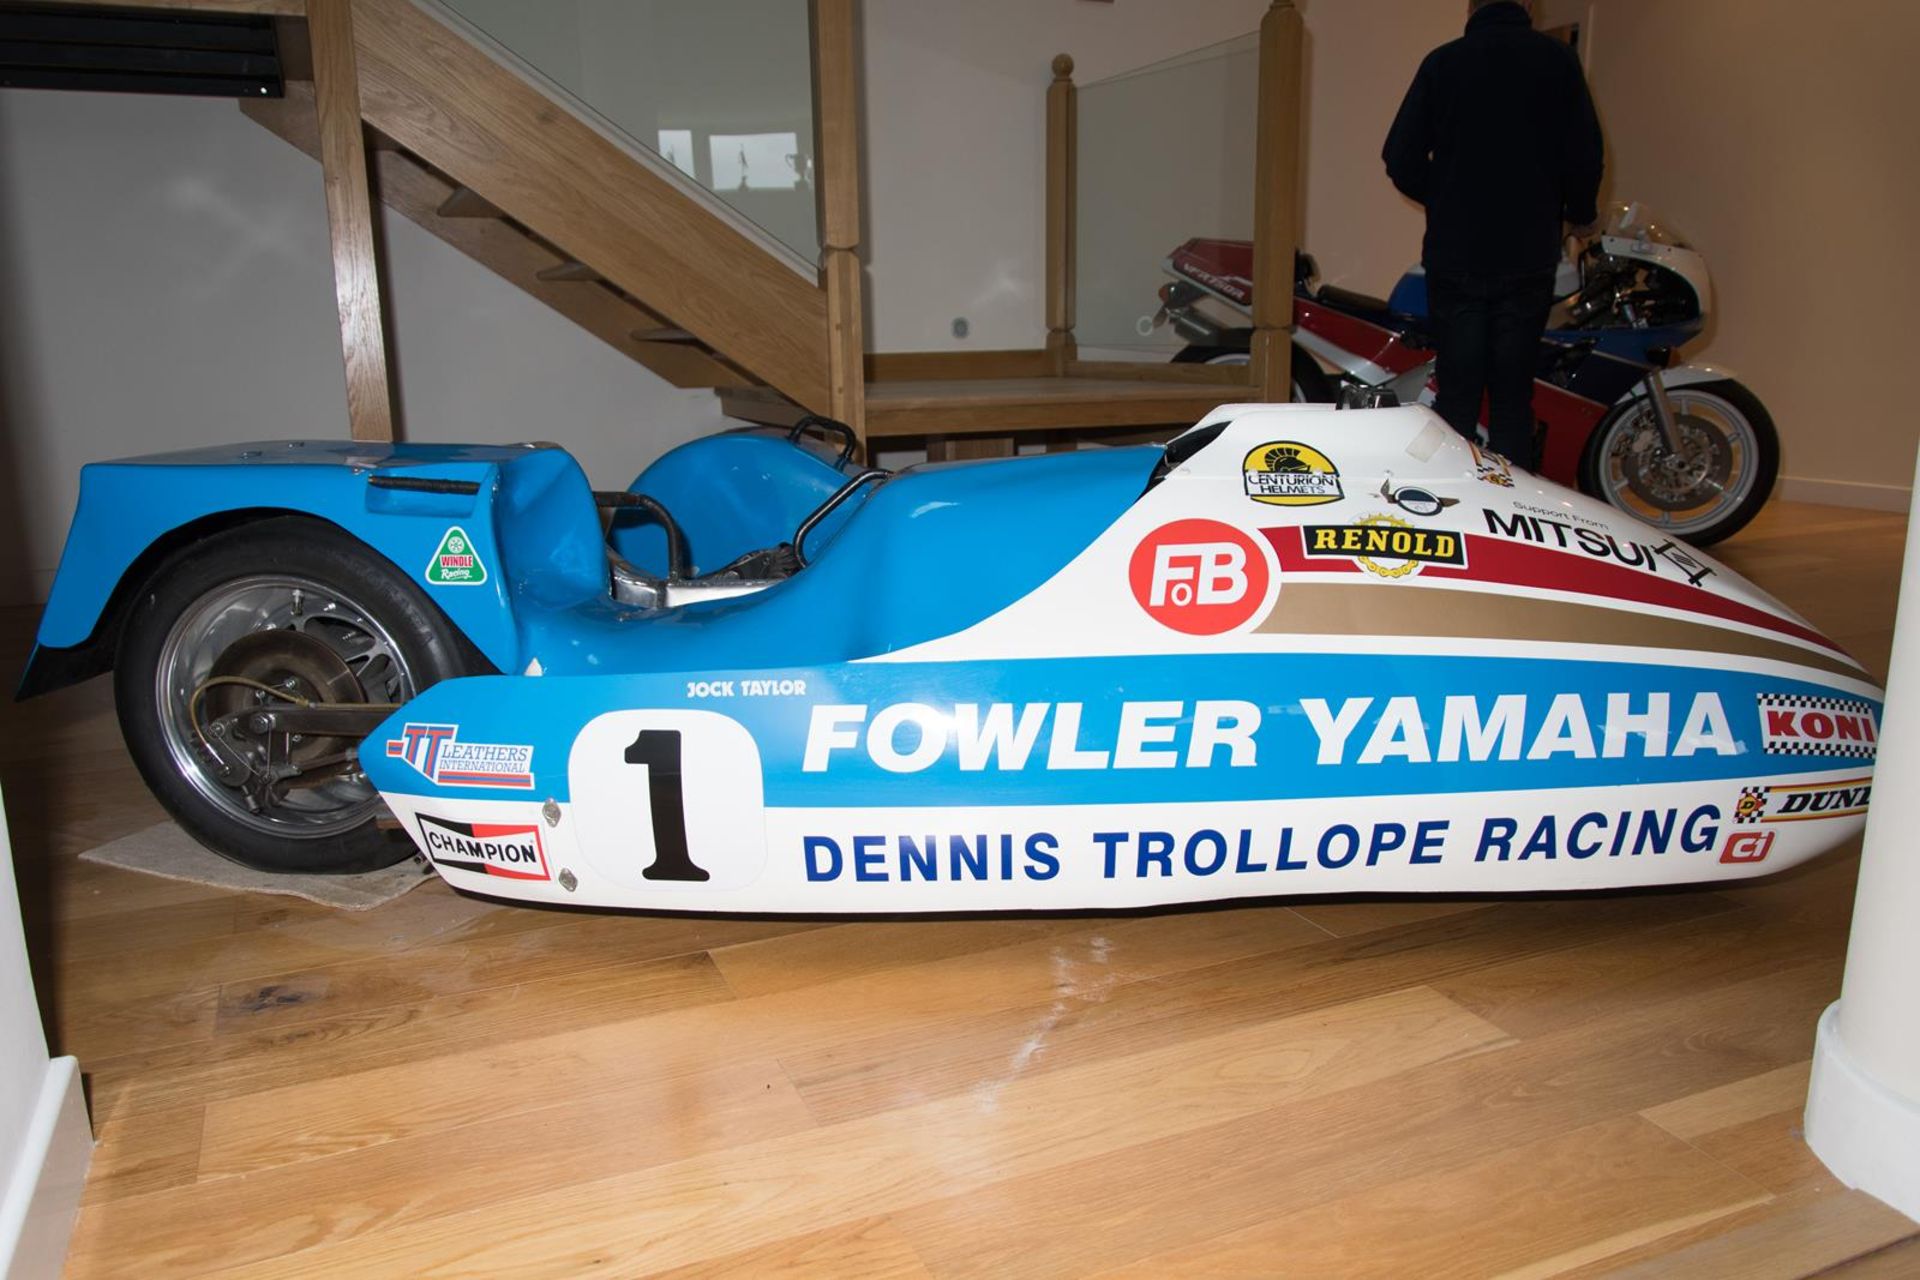 The 1980 Windle TZ 500/700 World Championship and TT winning Sidecar Outfit In 1979 Sidecar - Image 2 of 31